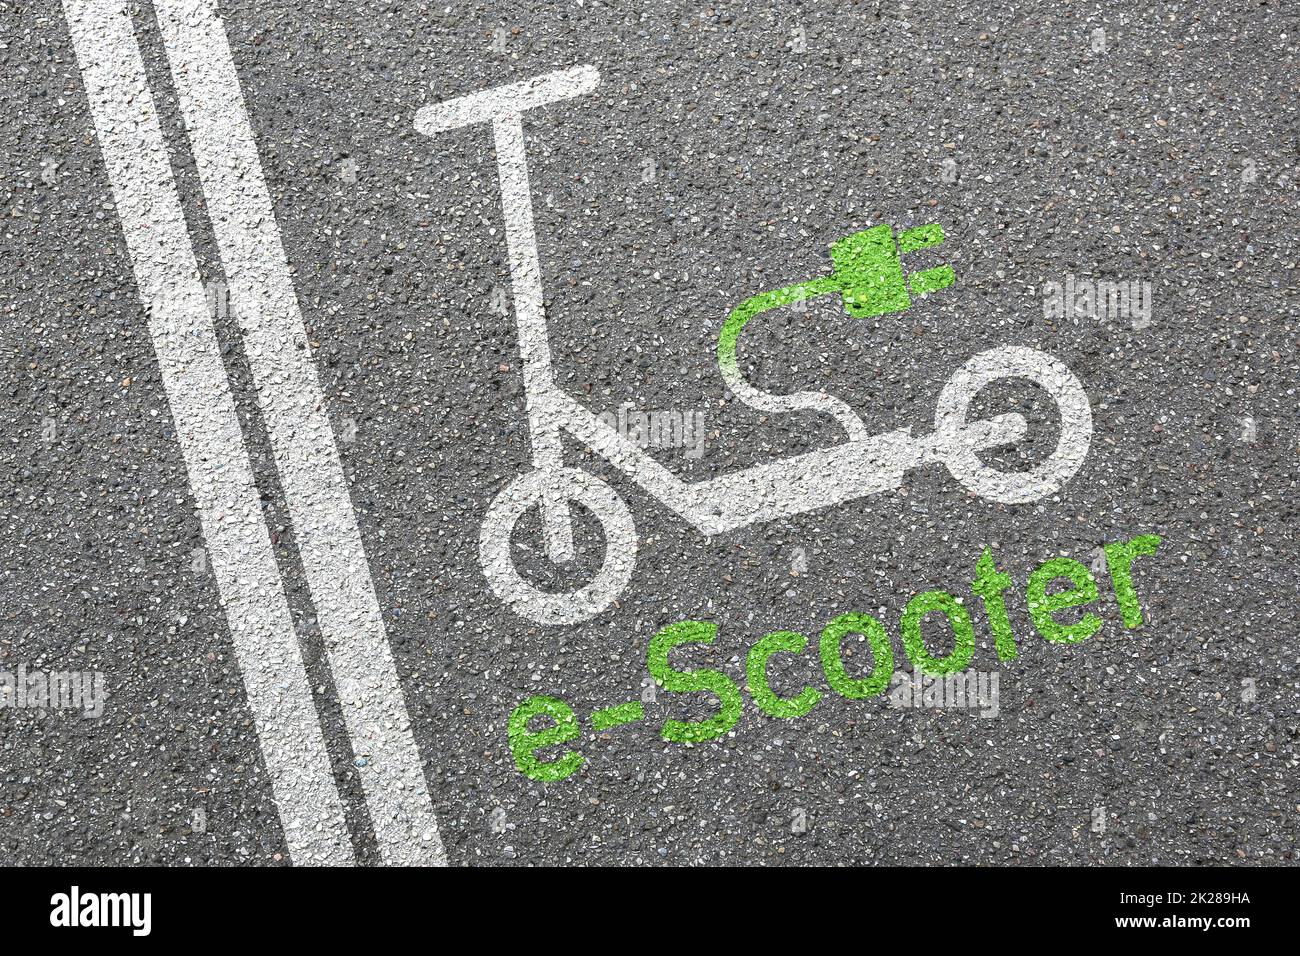 Electric scooter e-scooter road sign street eco friendly green mobility city transport Stock Photo